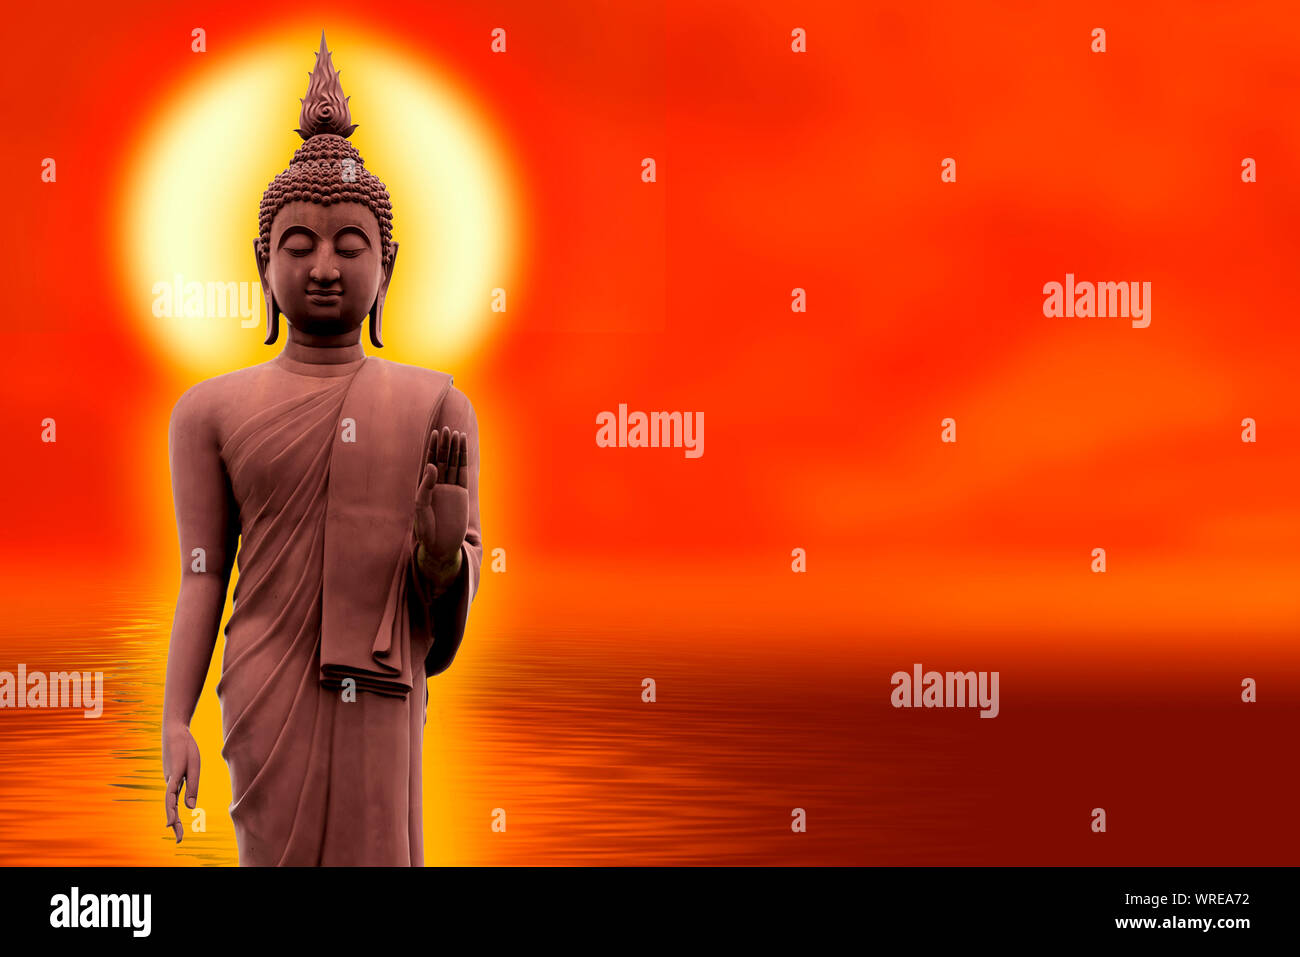 The Buddha stands gracefully on a lotus flower with an orange background.(About Buddhism) Stock Photo